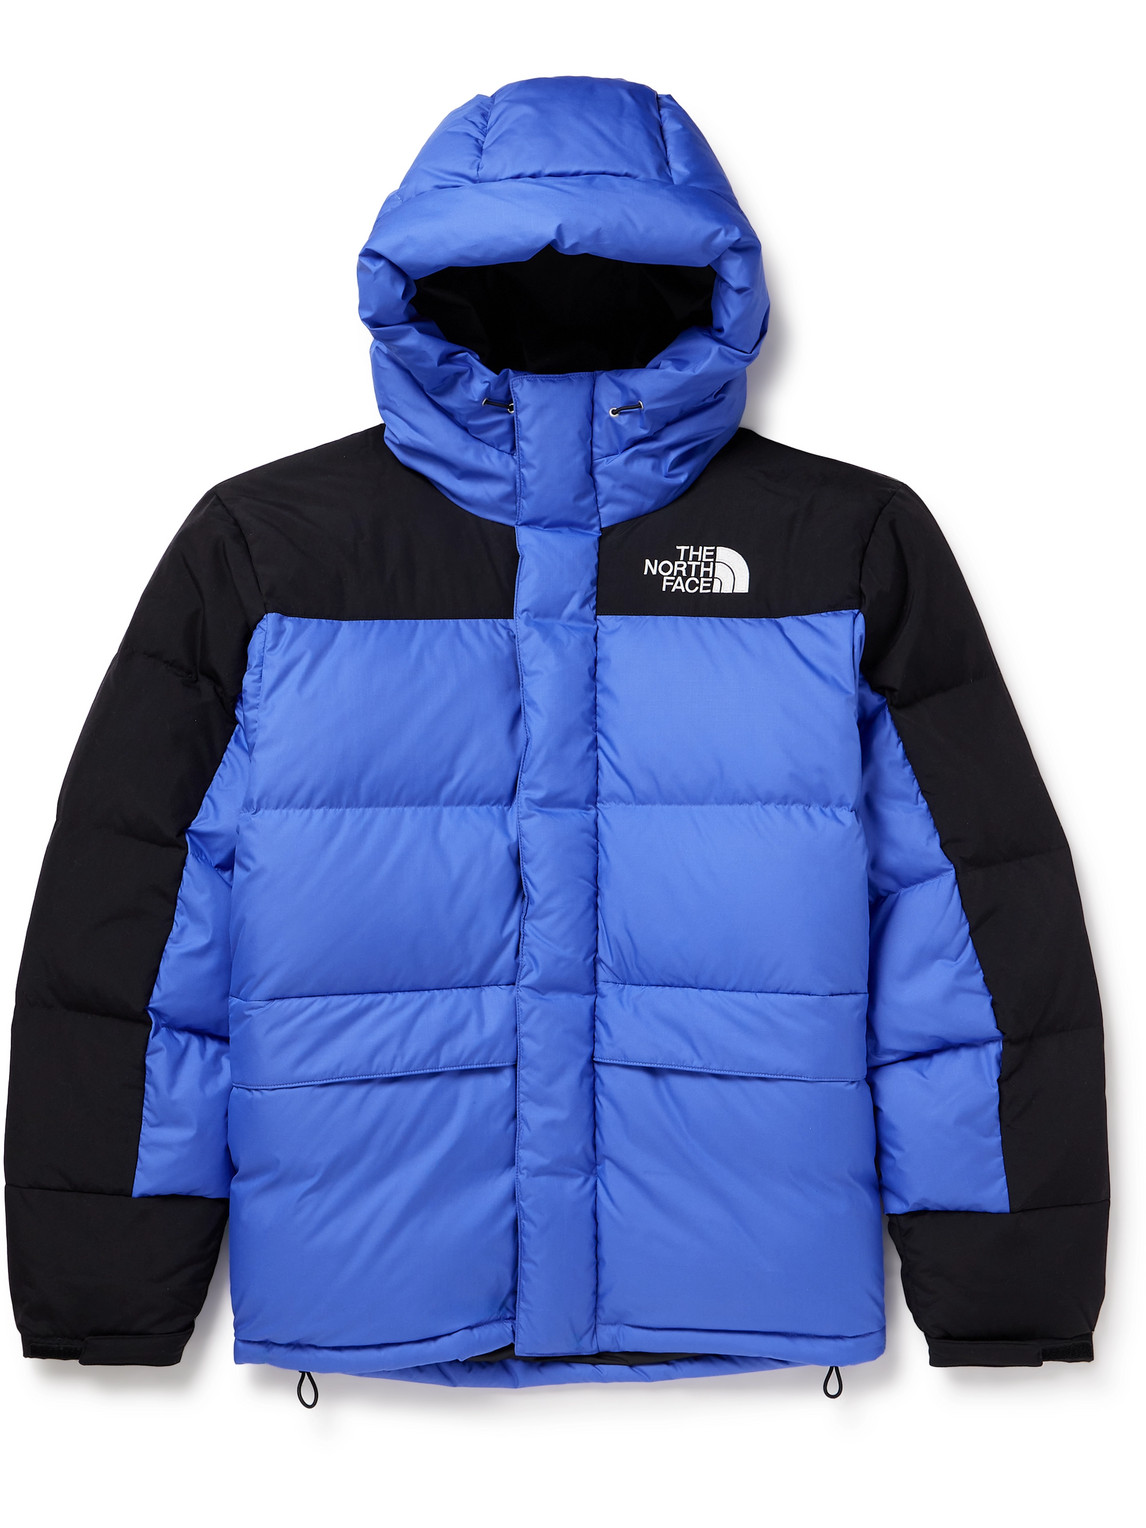 The North Face - Himalayan Logo-Embroidered Quilted Padded Nylon-Ripstop Down Parka - Men - Blue - XL von The North Face